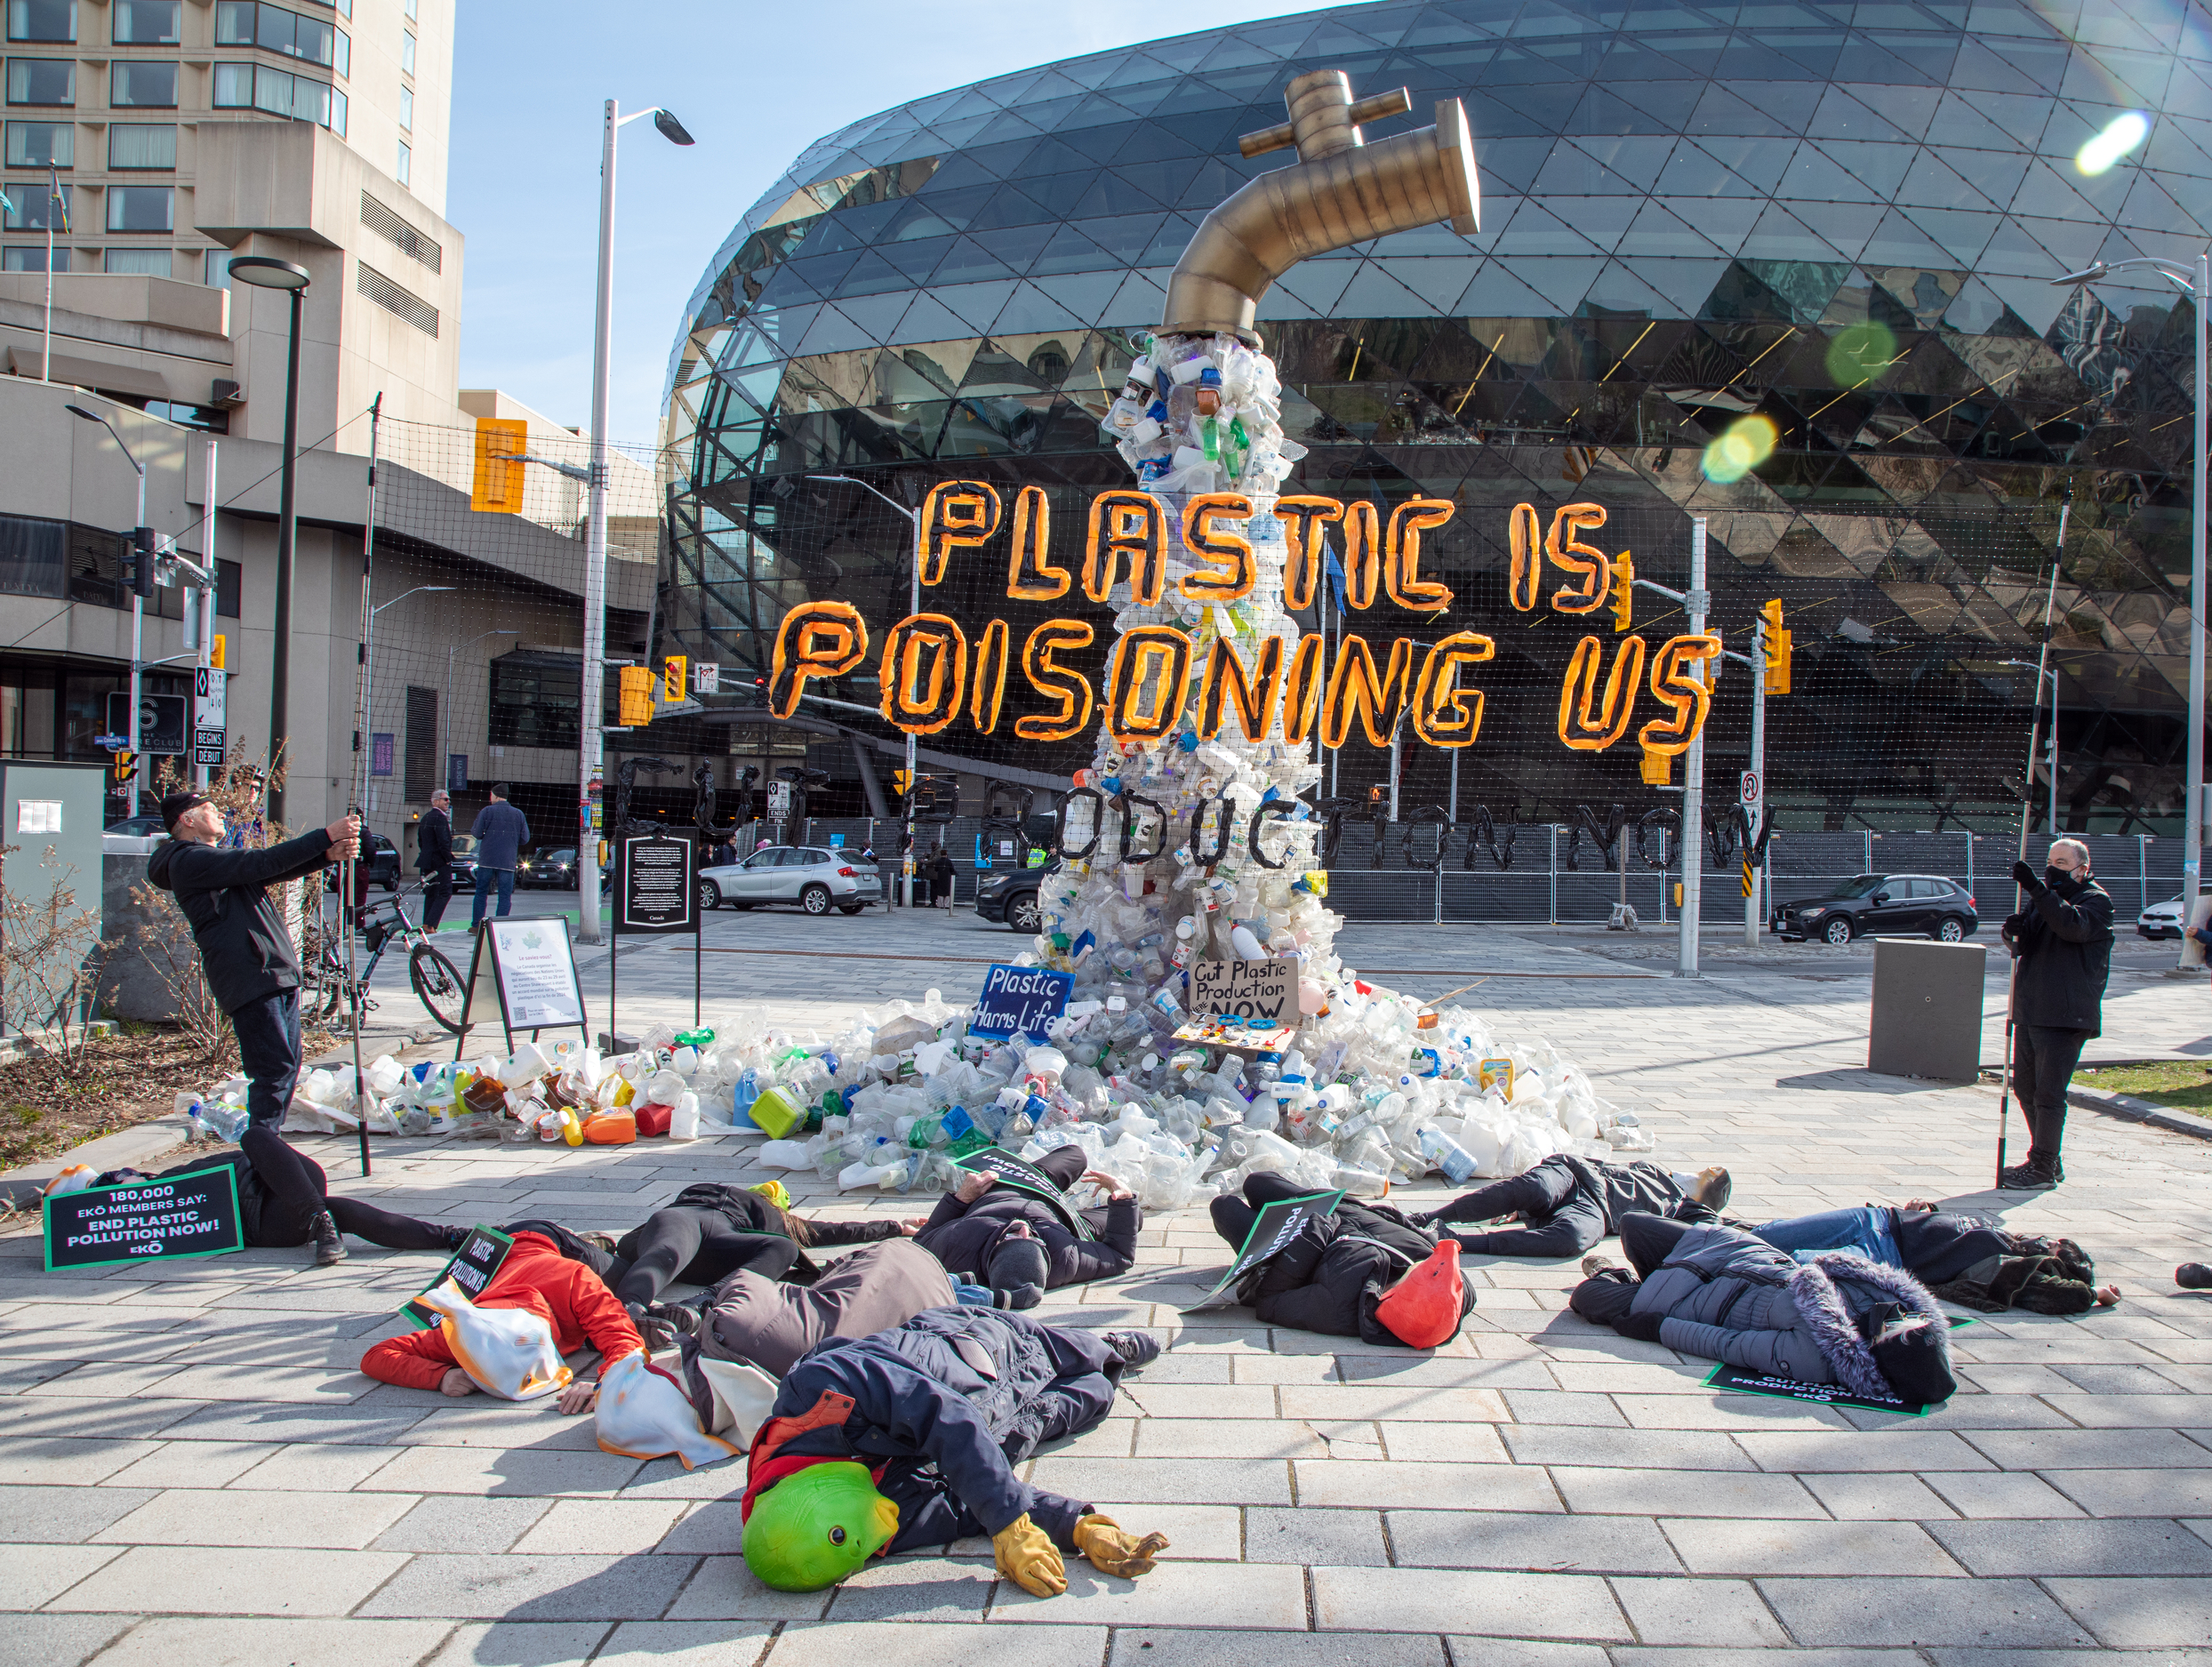 Giant sculpture of a tap with plastic pouring out. Banner in front says 'plastic is poisoning us'. protestors lie down in the foreground.